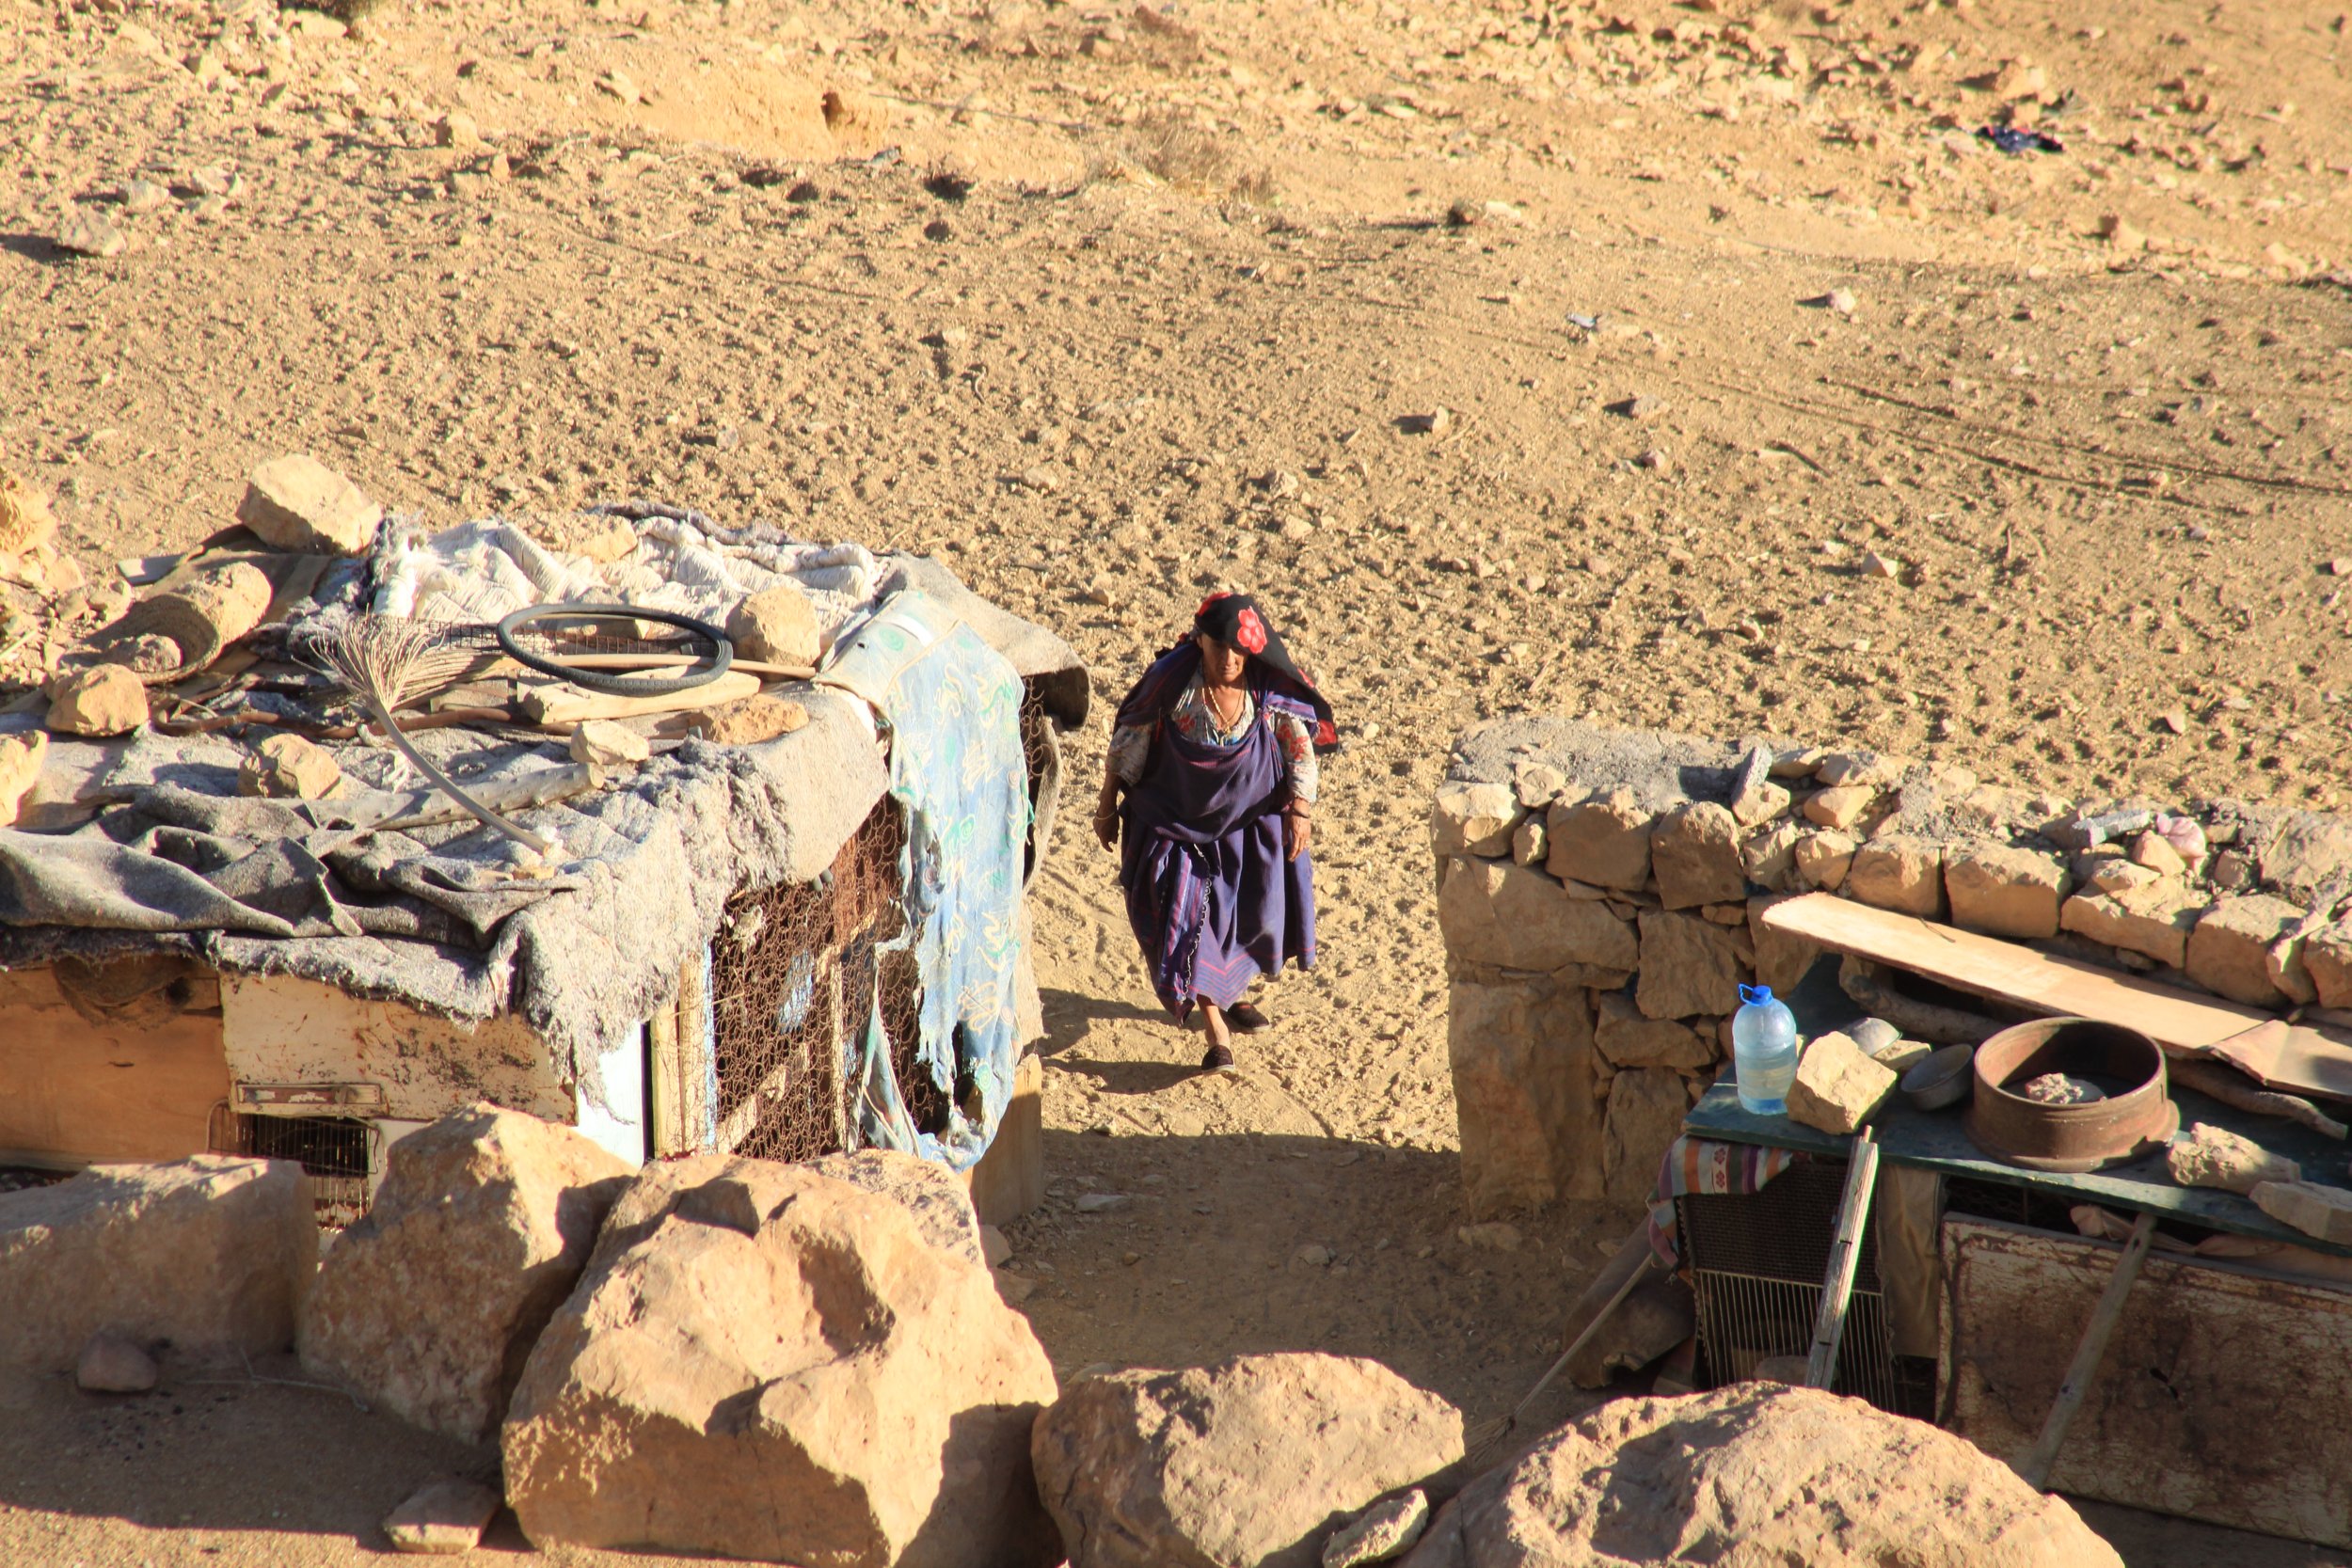  NOVEMBER 19th, 2022. PICTURED: A local Berber woman in the heat of the day. PC: Andrew Corbley © 